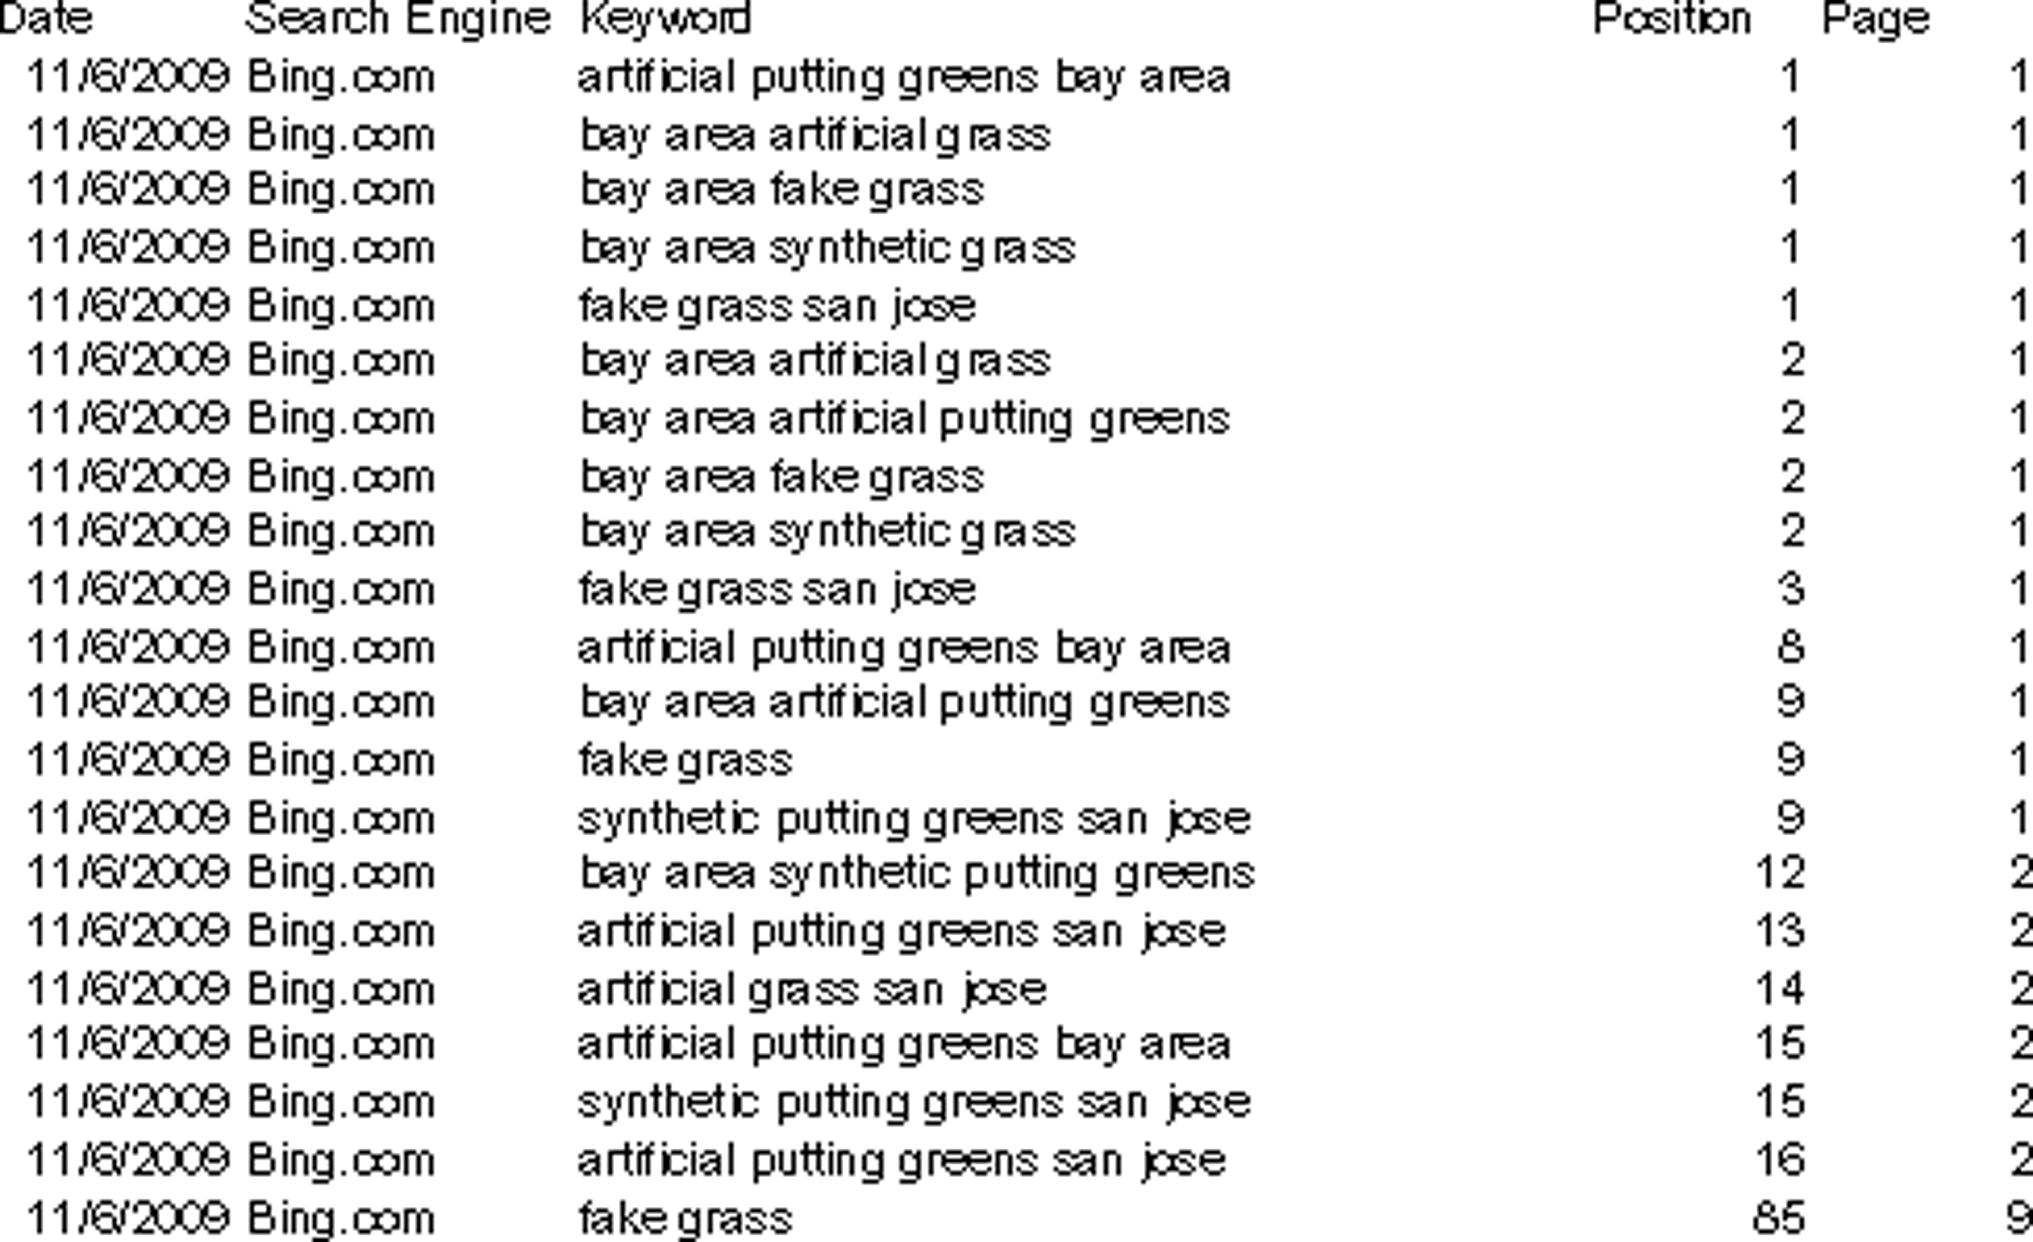 SERP Results Search Engine Optimization for Bay Area Synthetic Grass